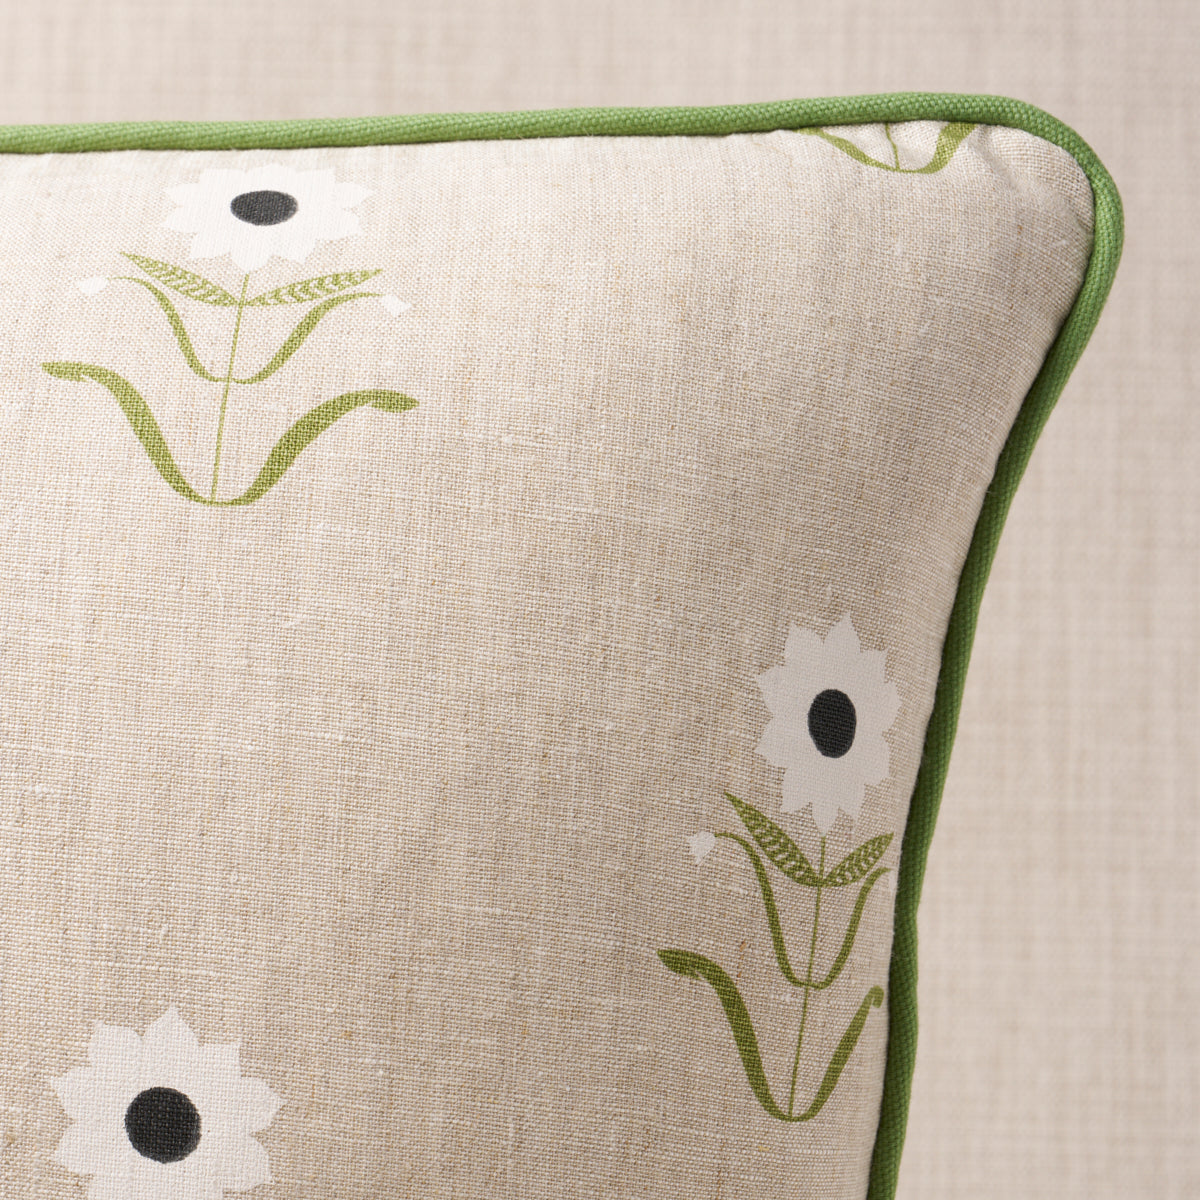 Forget Me Nots Pillow | White on Linen